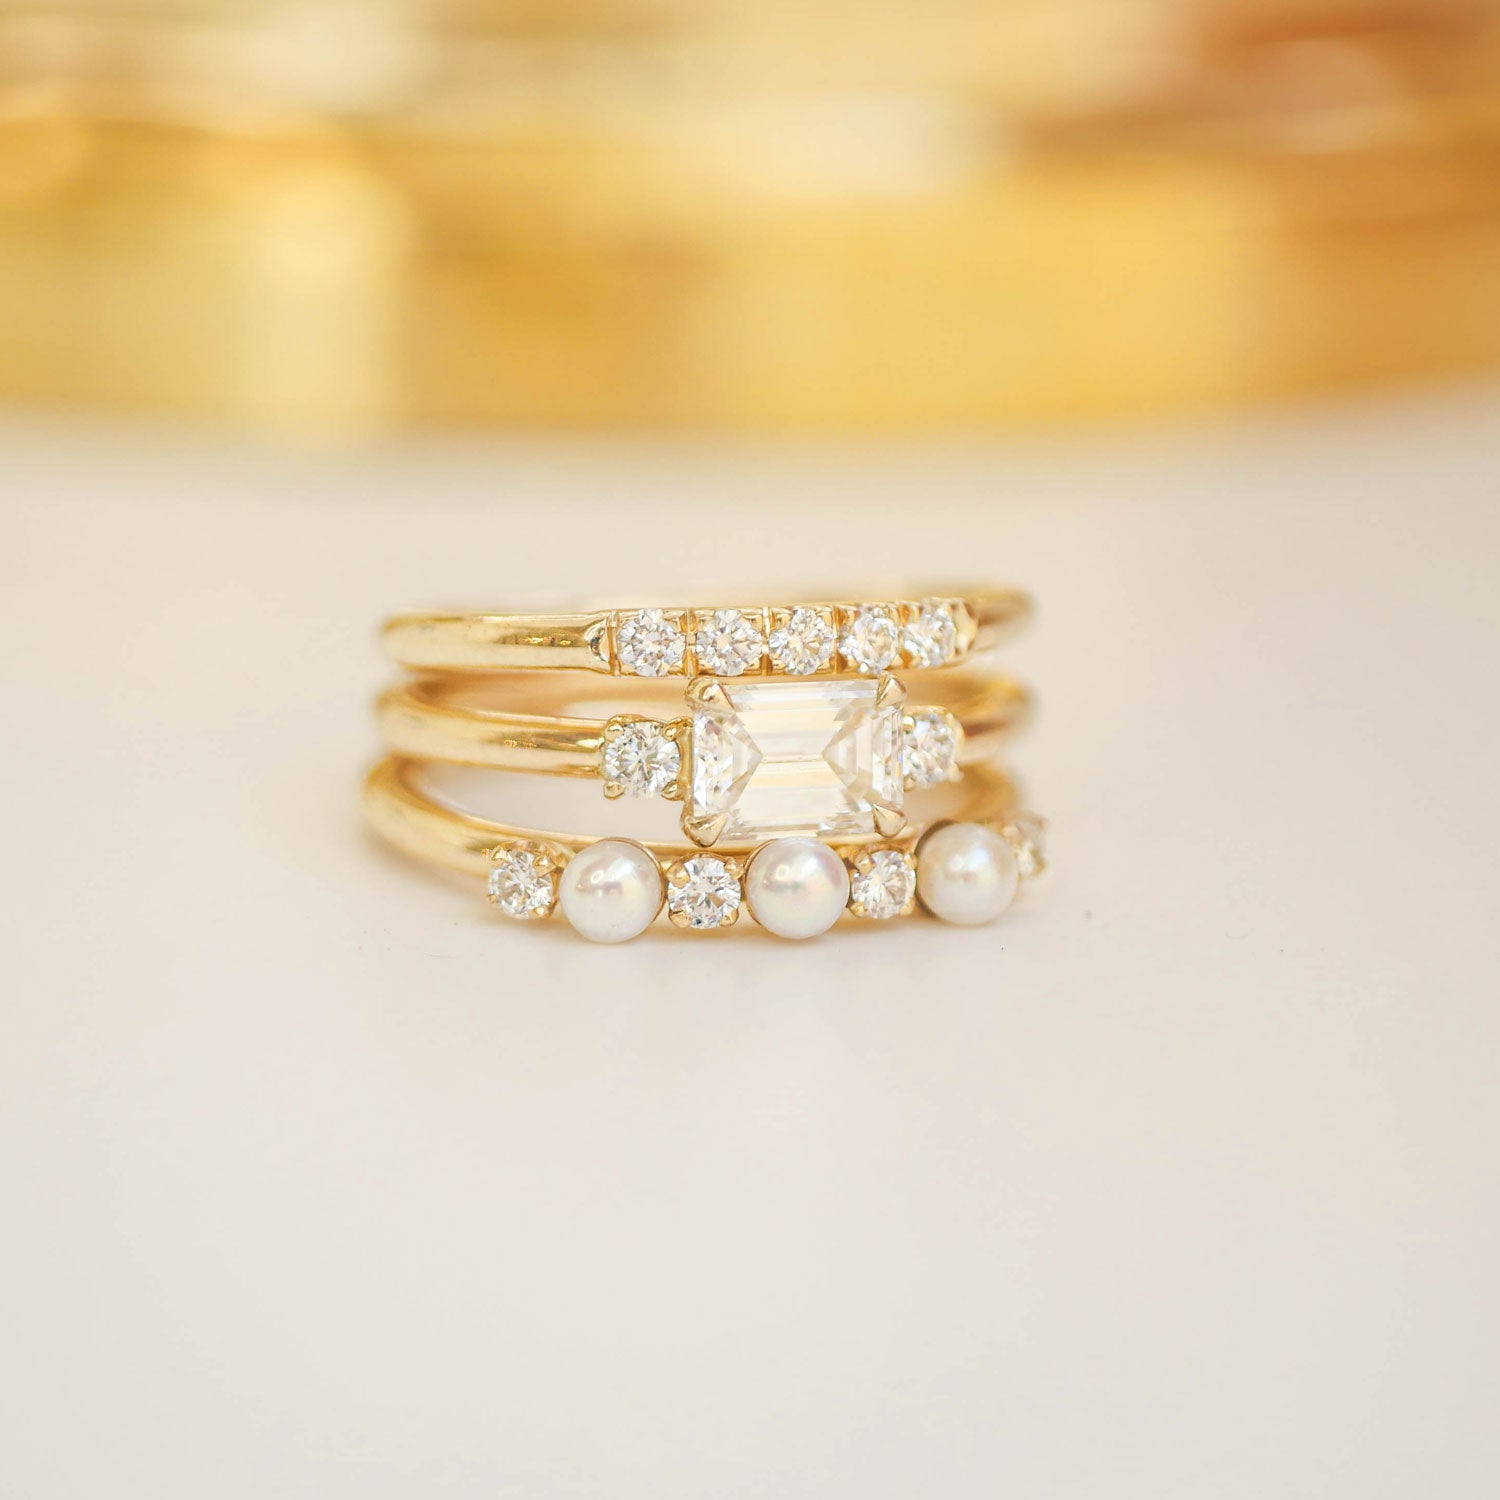 2mm Pearl & Diamond Delicate Stacking Ring Set | Berlinger Jewelry 14K Yellow Gold / 9 | Female by Berlinger Jewelry